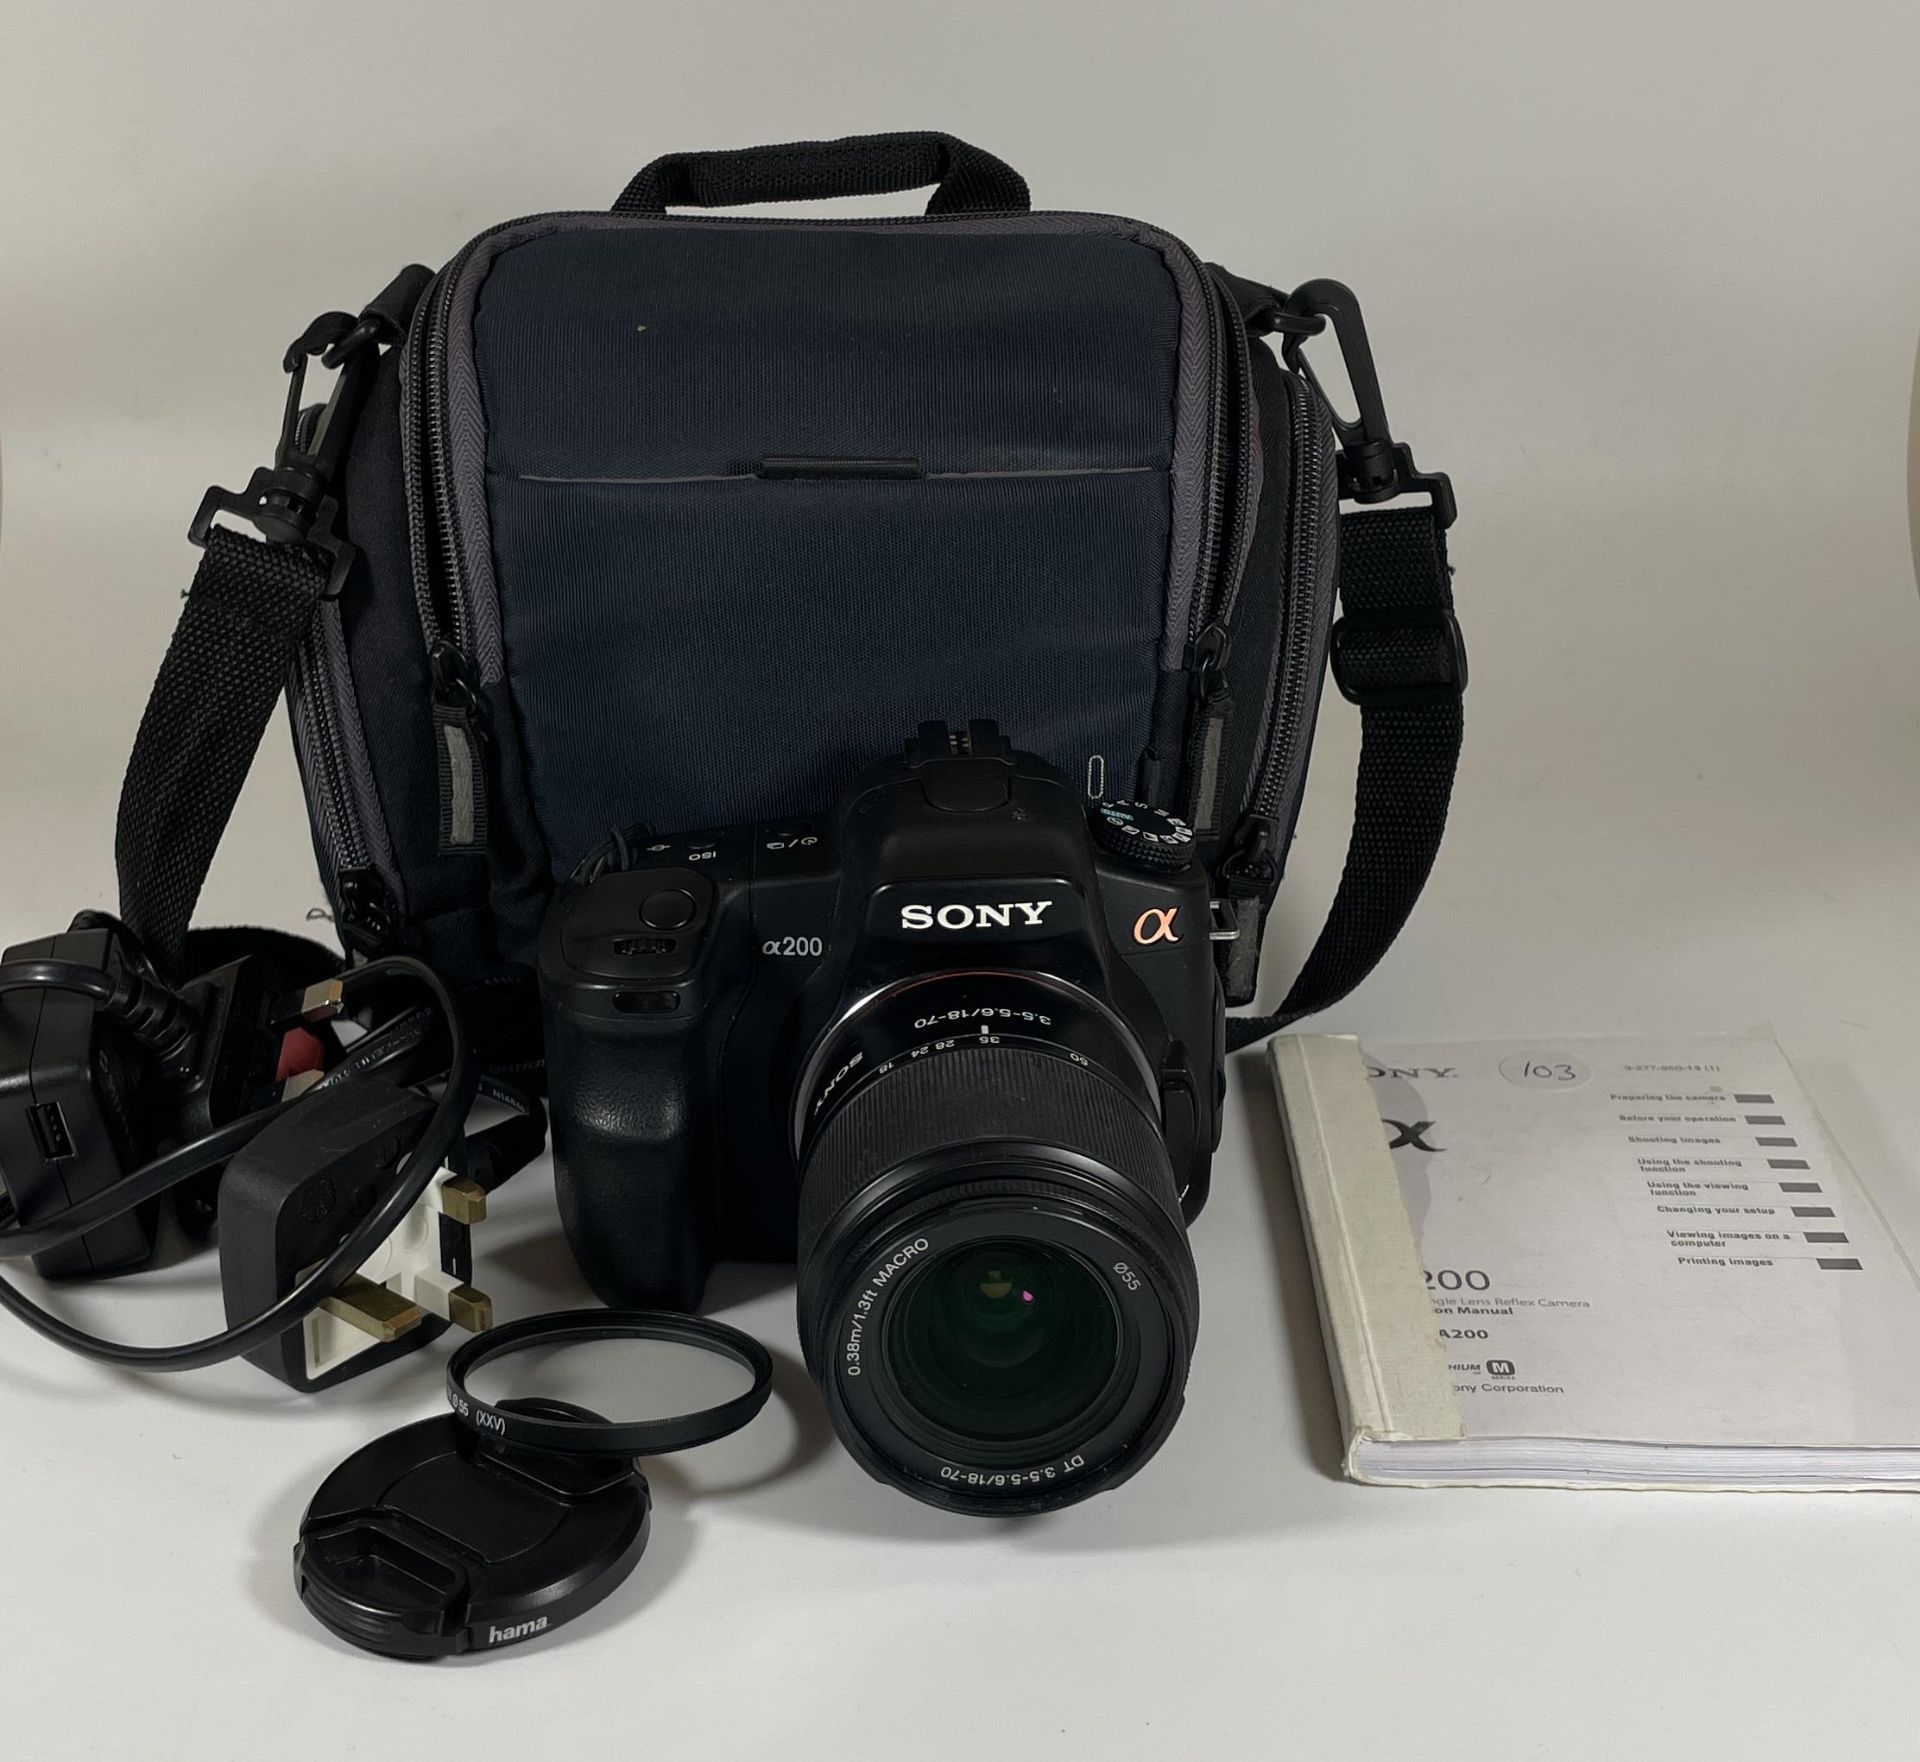 A SONY A200 DIGITAL SLR CAMERA WITH 0.38M/1.3FT MACRO LENS, CHARGER, MANUAL & CASE